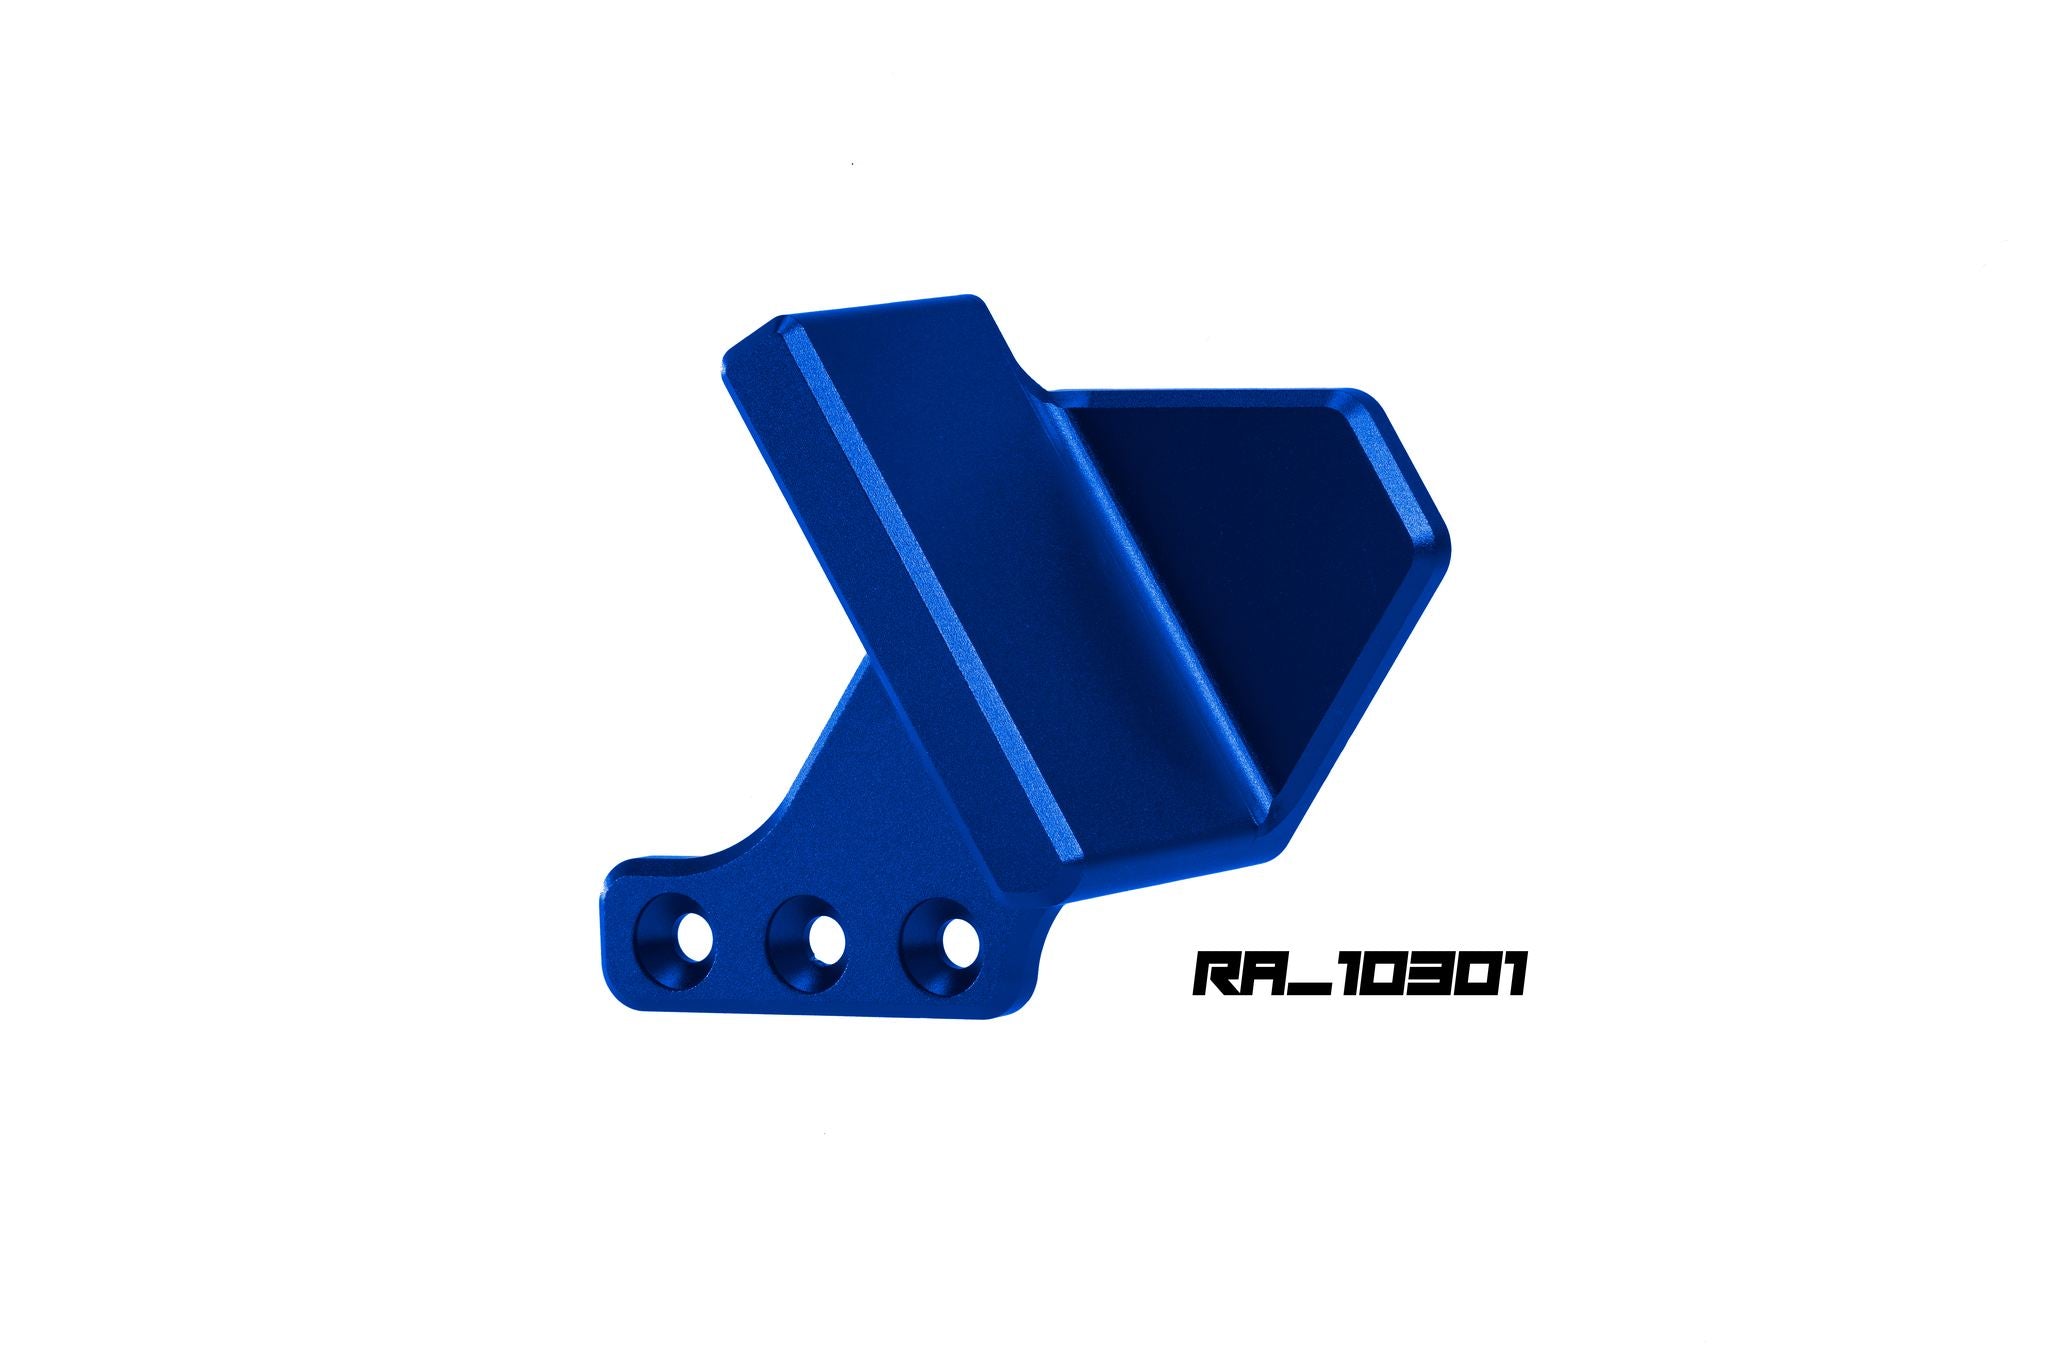 Revanchist Airsoft TS Style Thumbrest for Hicapa GBB